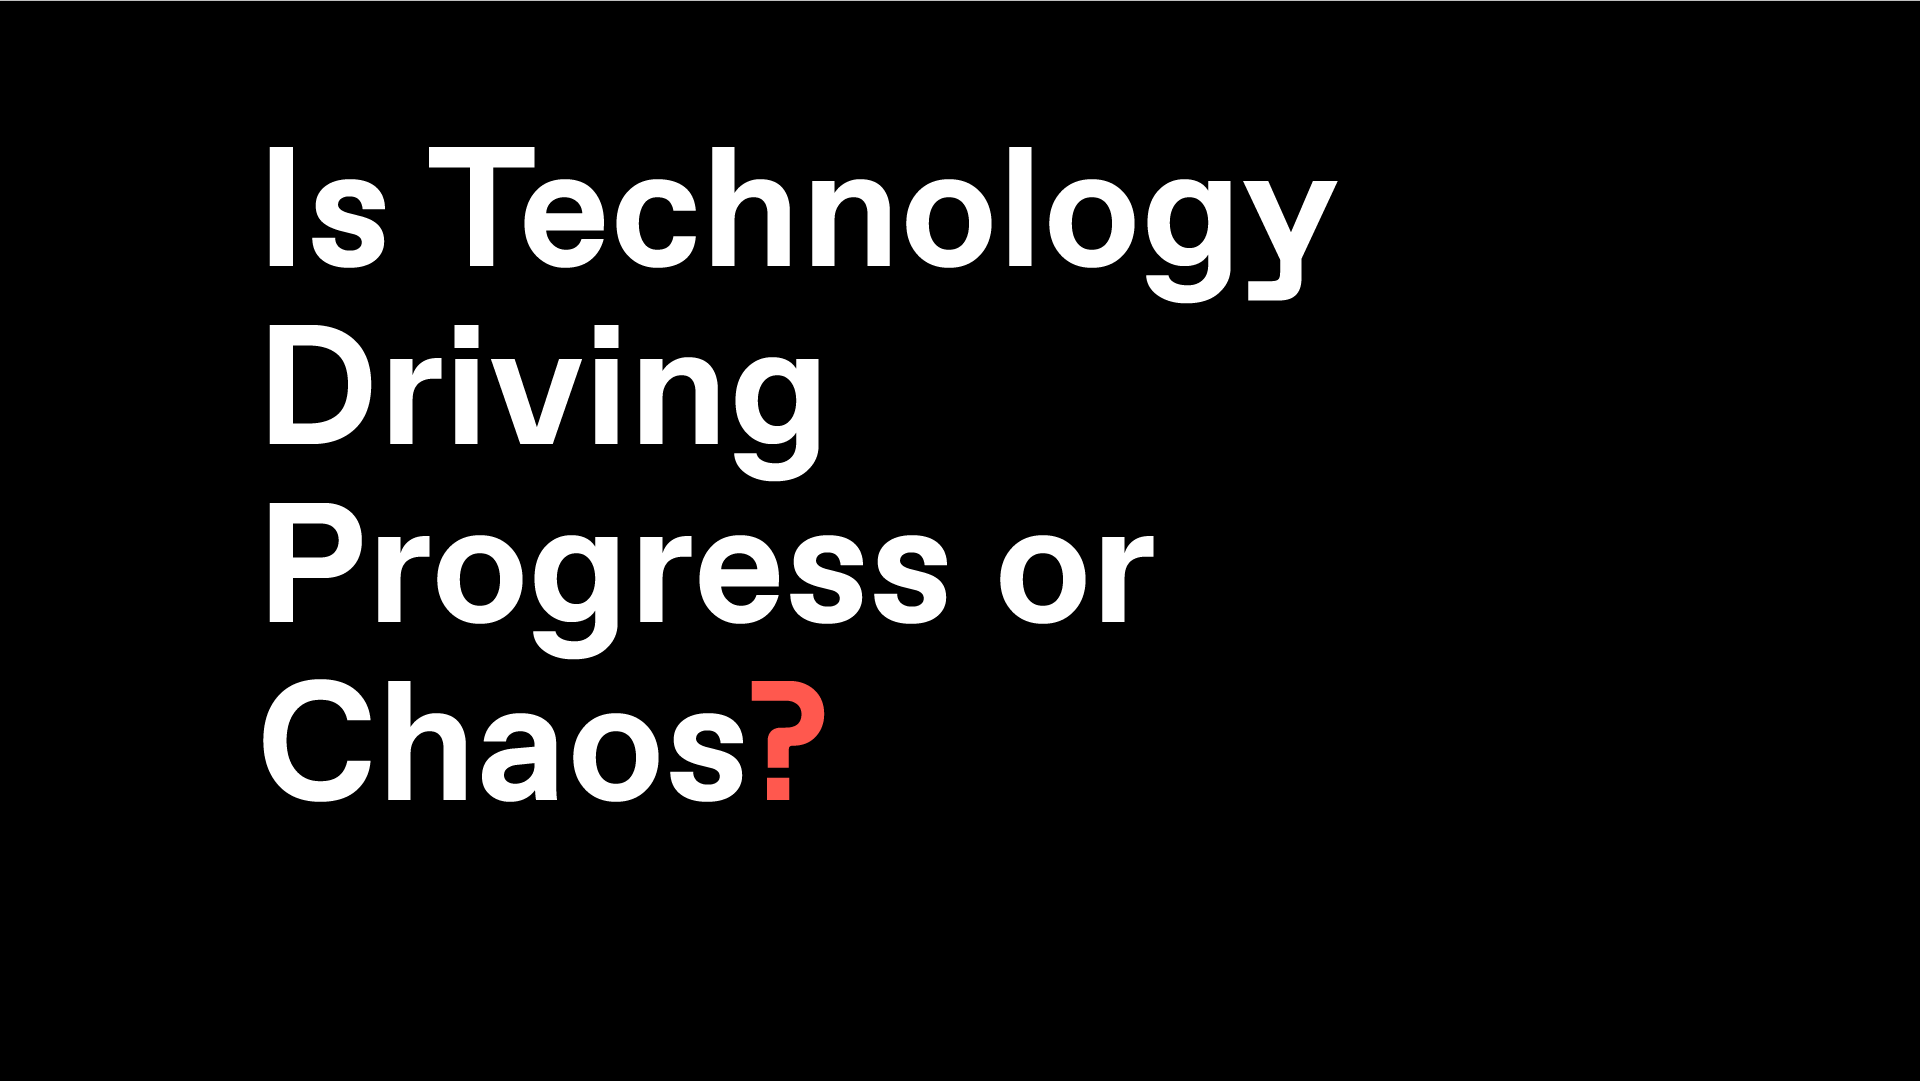 https://unfinished.com/news/unfinished-live-episode-3-asks-is-technology-driving-progress-or-chaos/